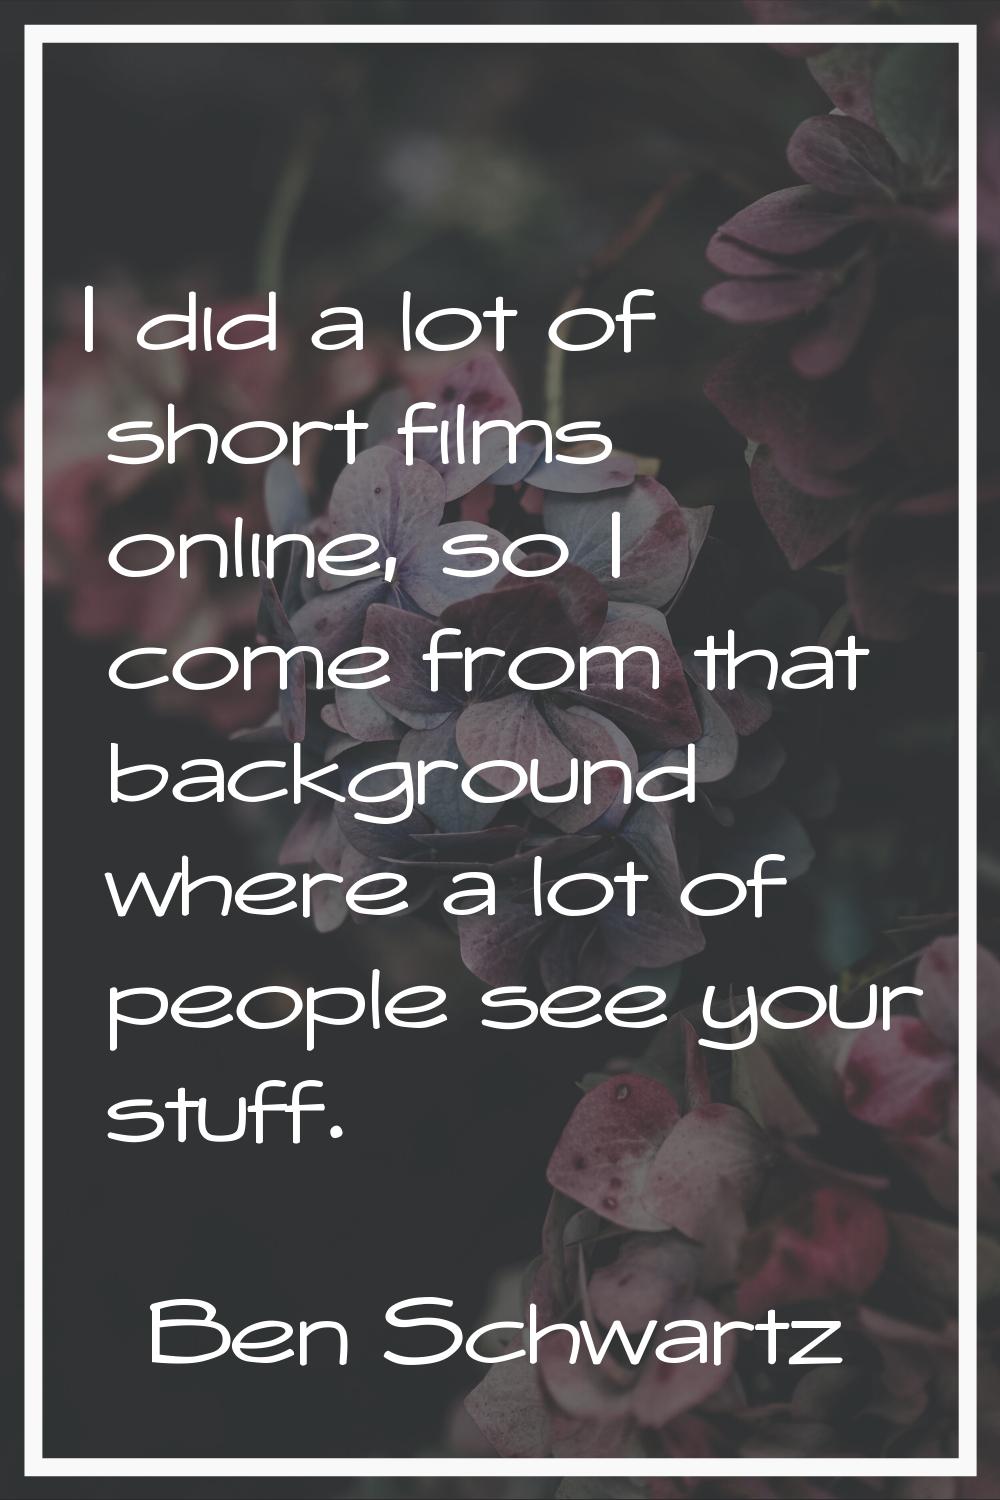 I did a lot of short films online, so I come from that background where a lot of people see your st